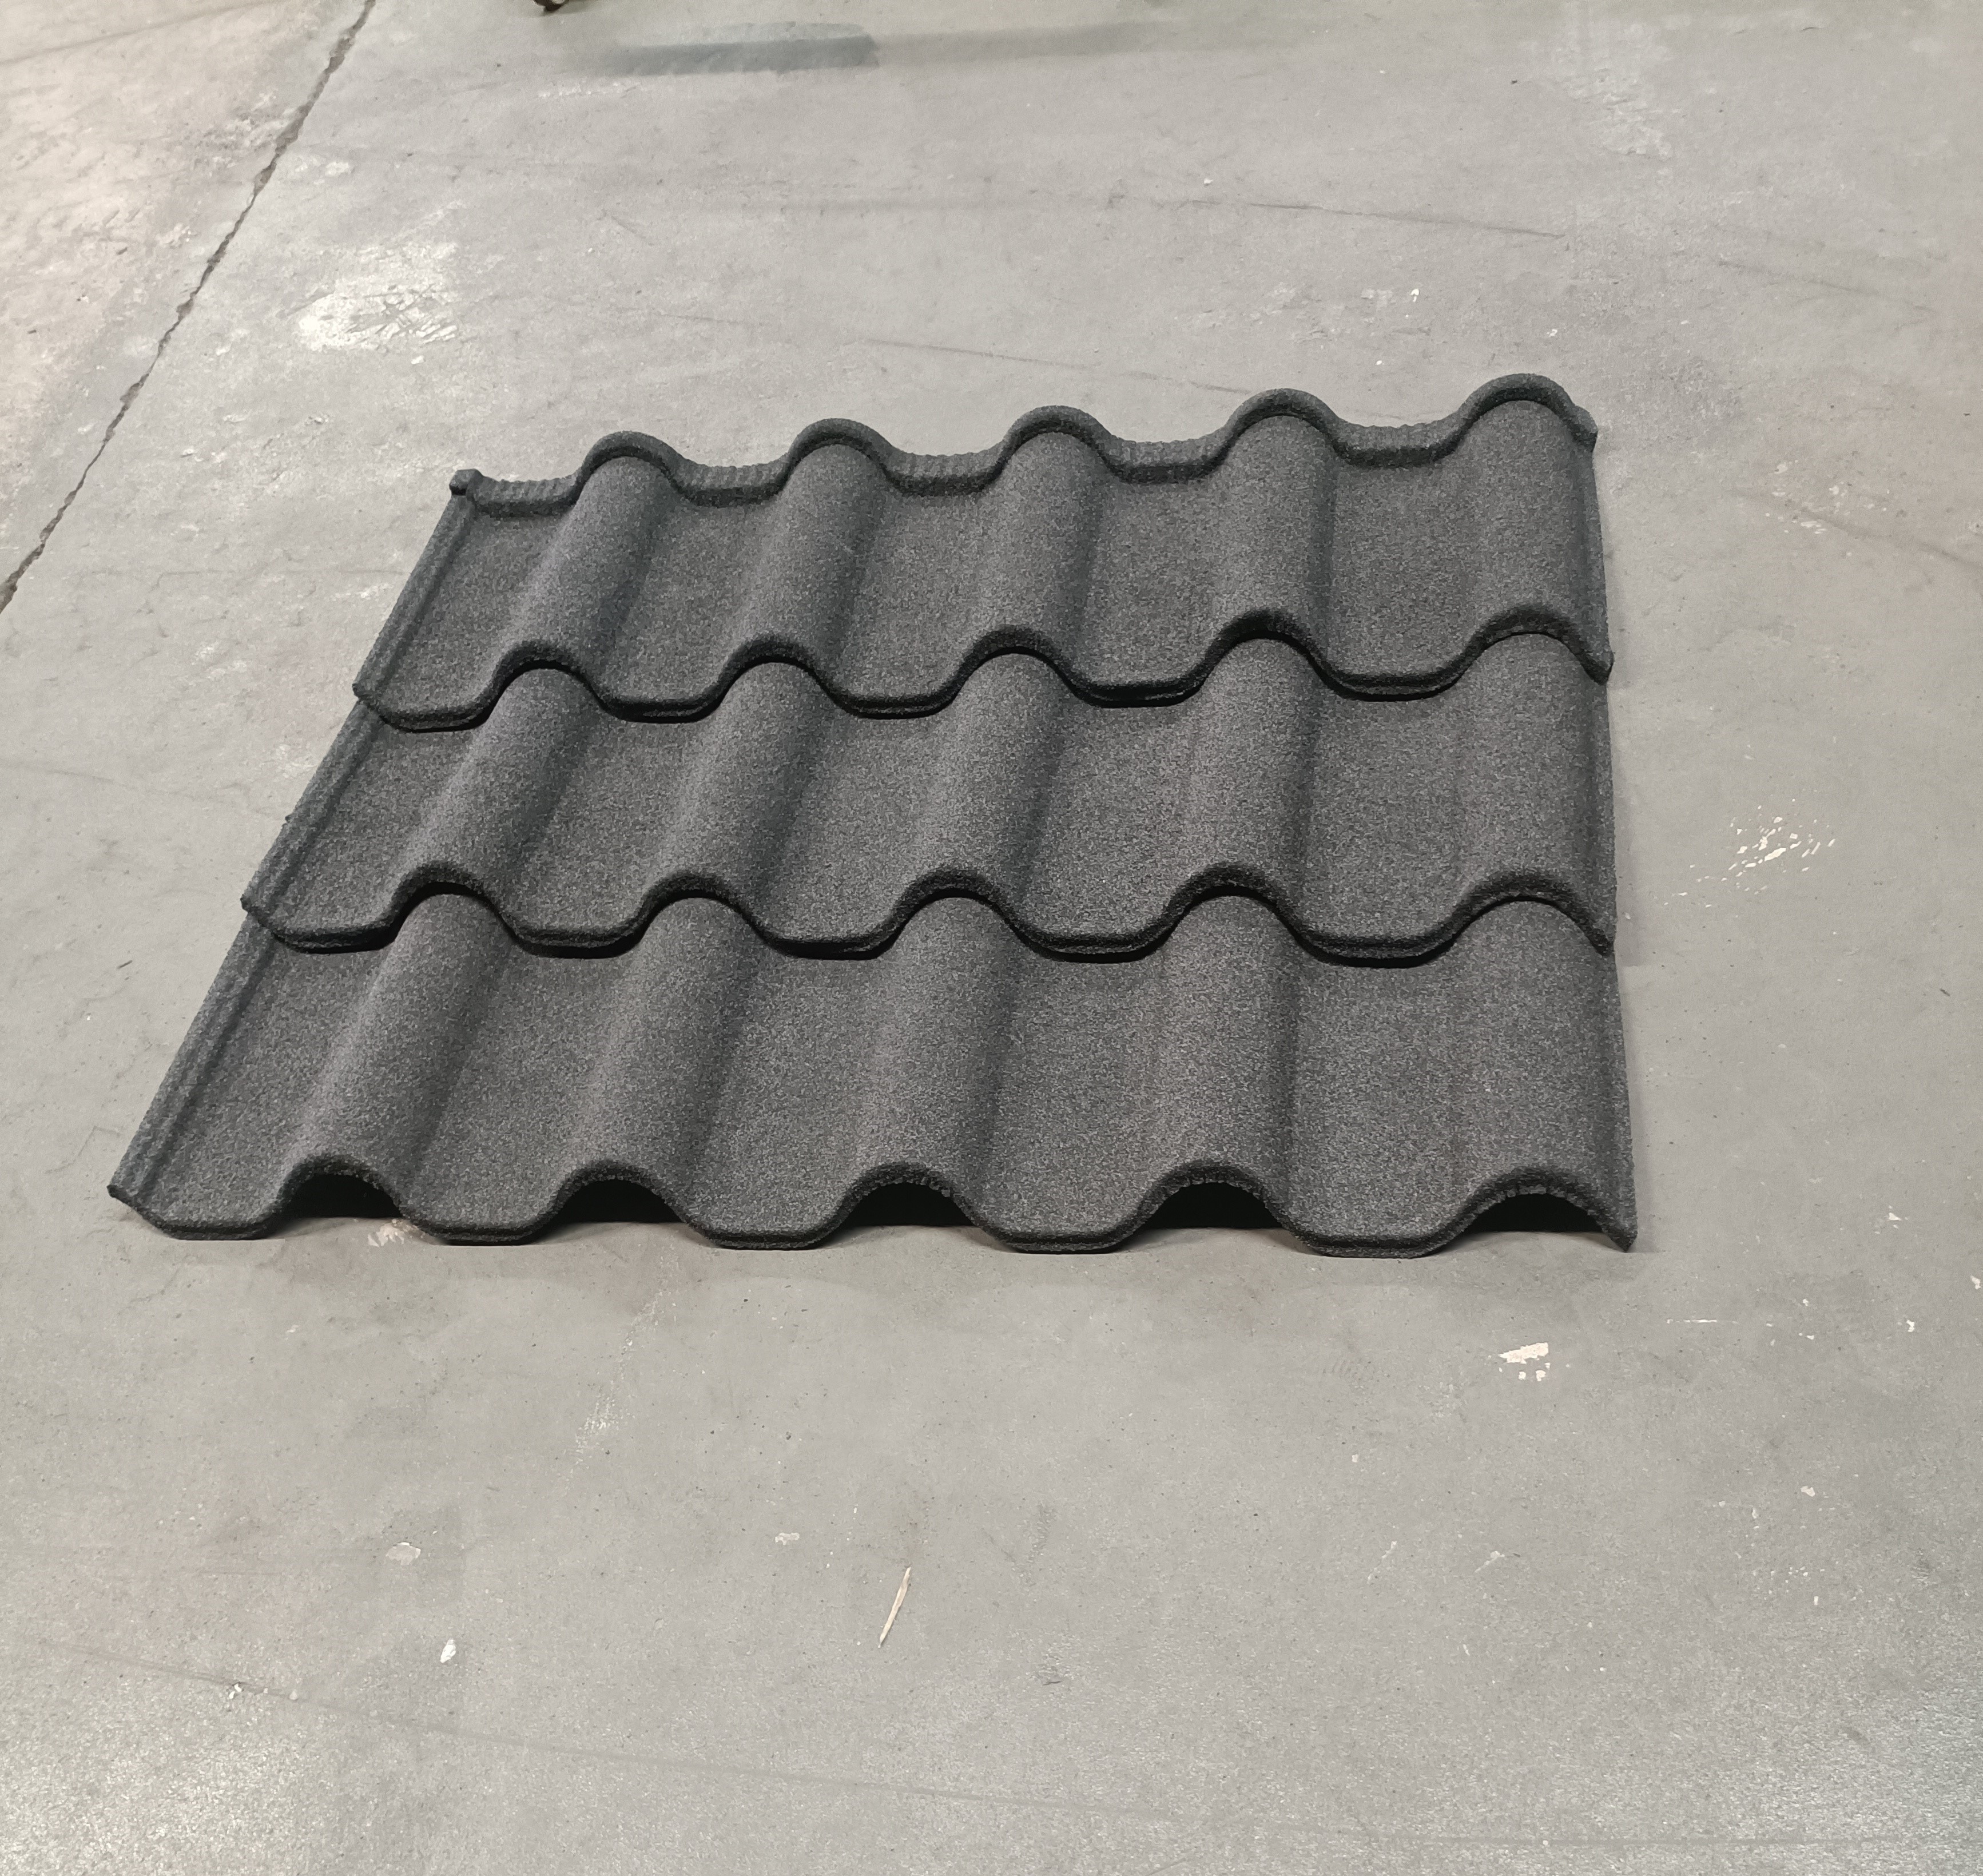 Wholesale Price China Gl Roofing Sheet - Durable Construction Material Tile Stone Coated sheet Barrel Type Roofing Tile – Lueding